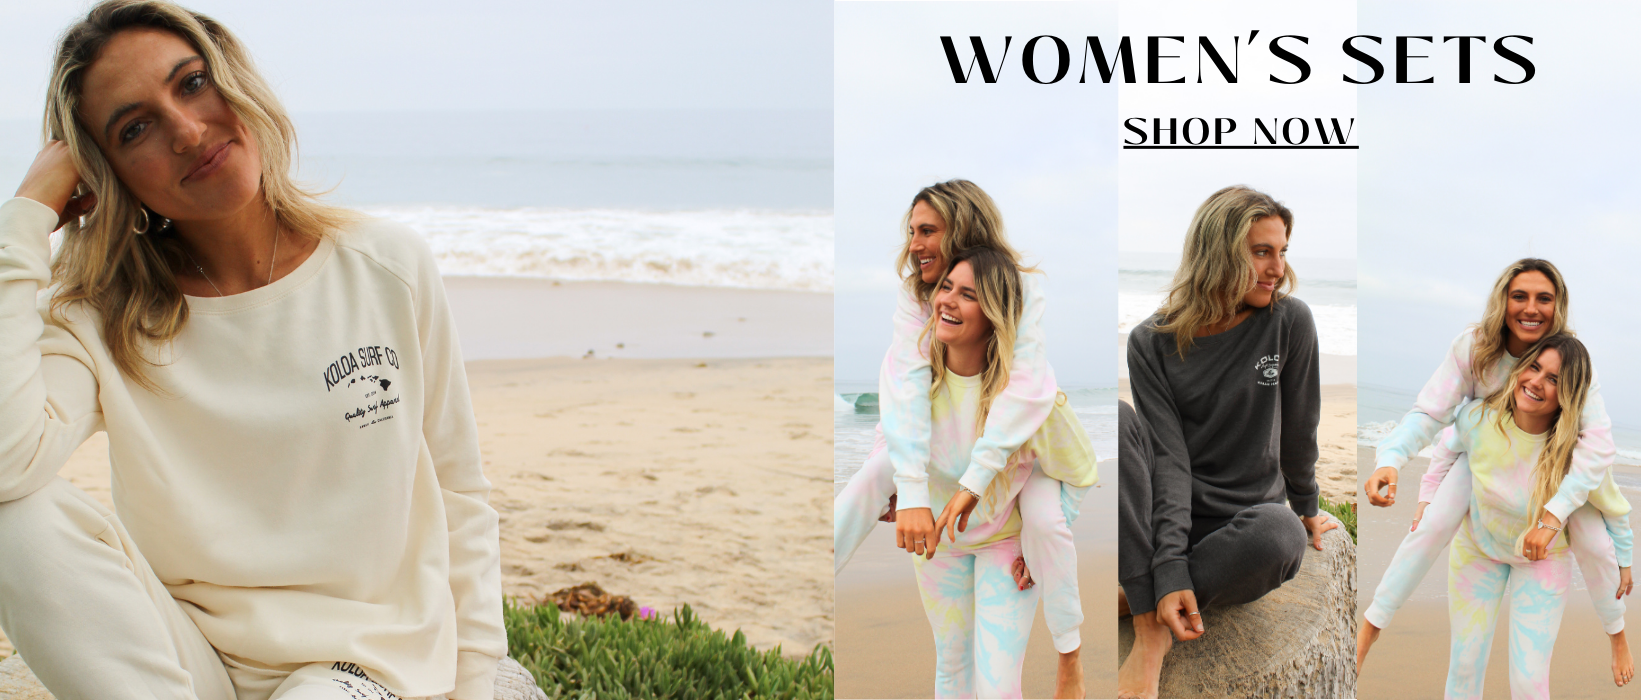 Check out these cute, matching women's sets! You'll definitely wanna stock up of these cute looks!